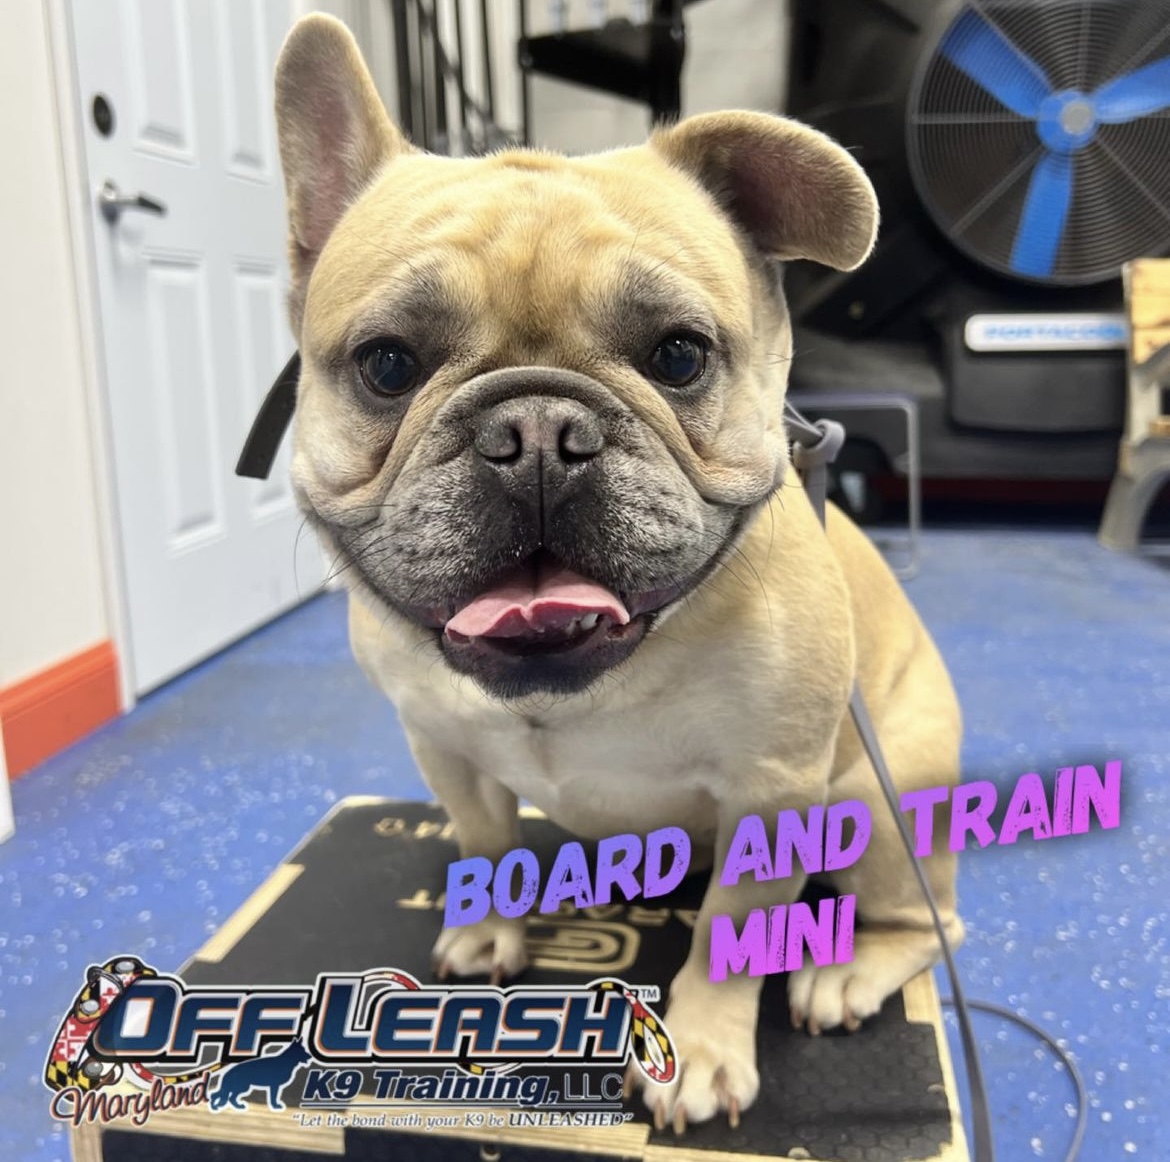 Dog named Mini who completed our board and train program in Maryland